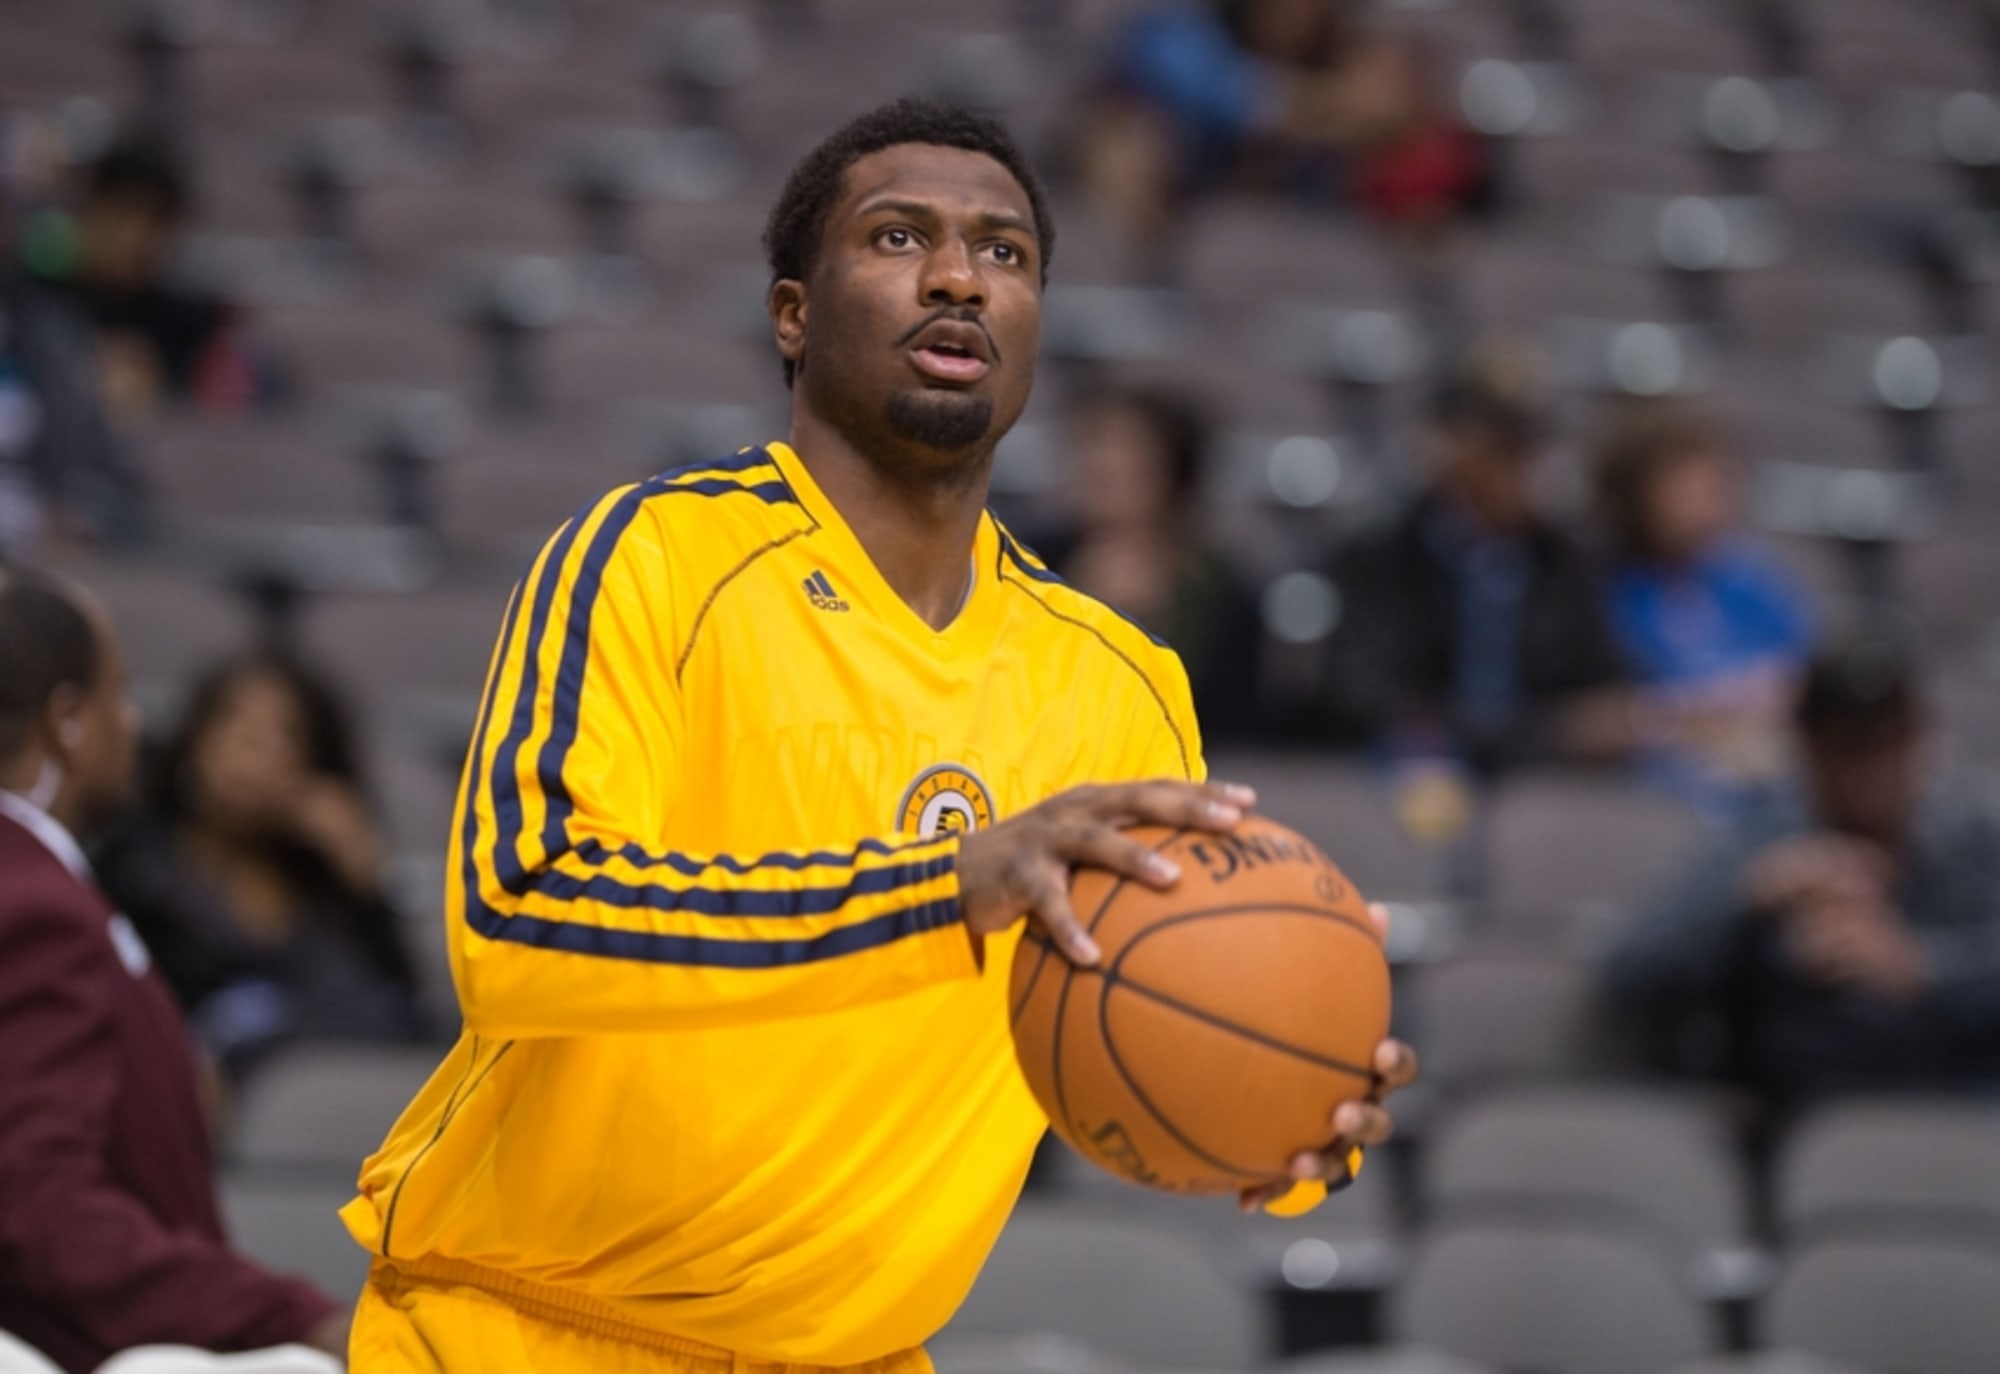 Who's playing small forward for the Indiana Pacers now?